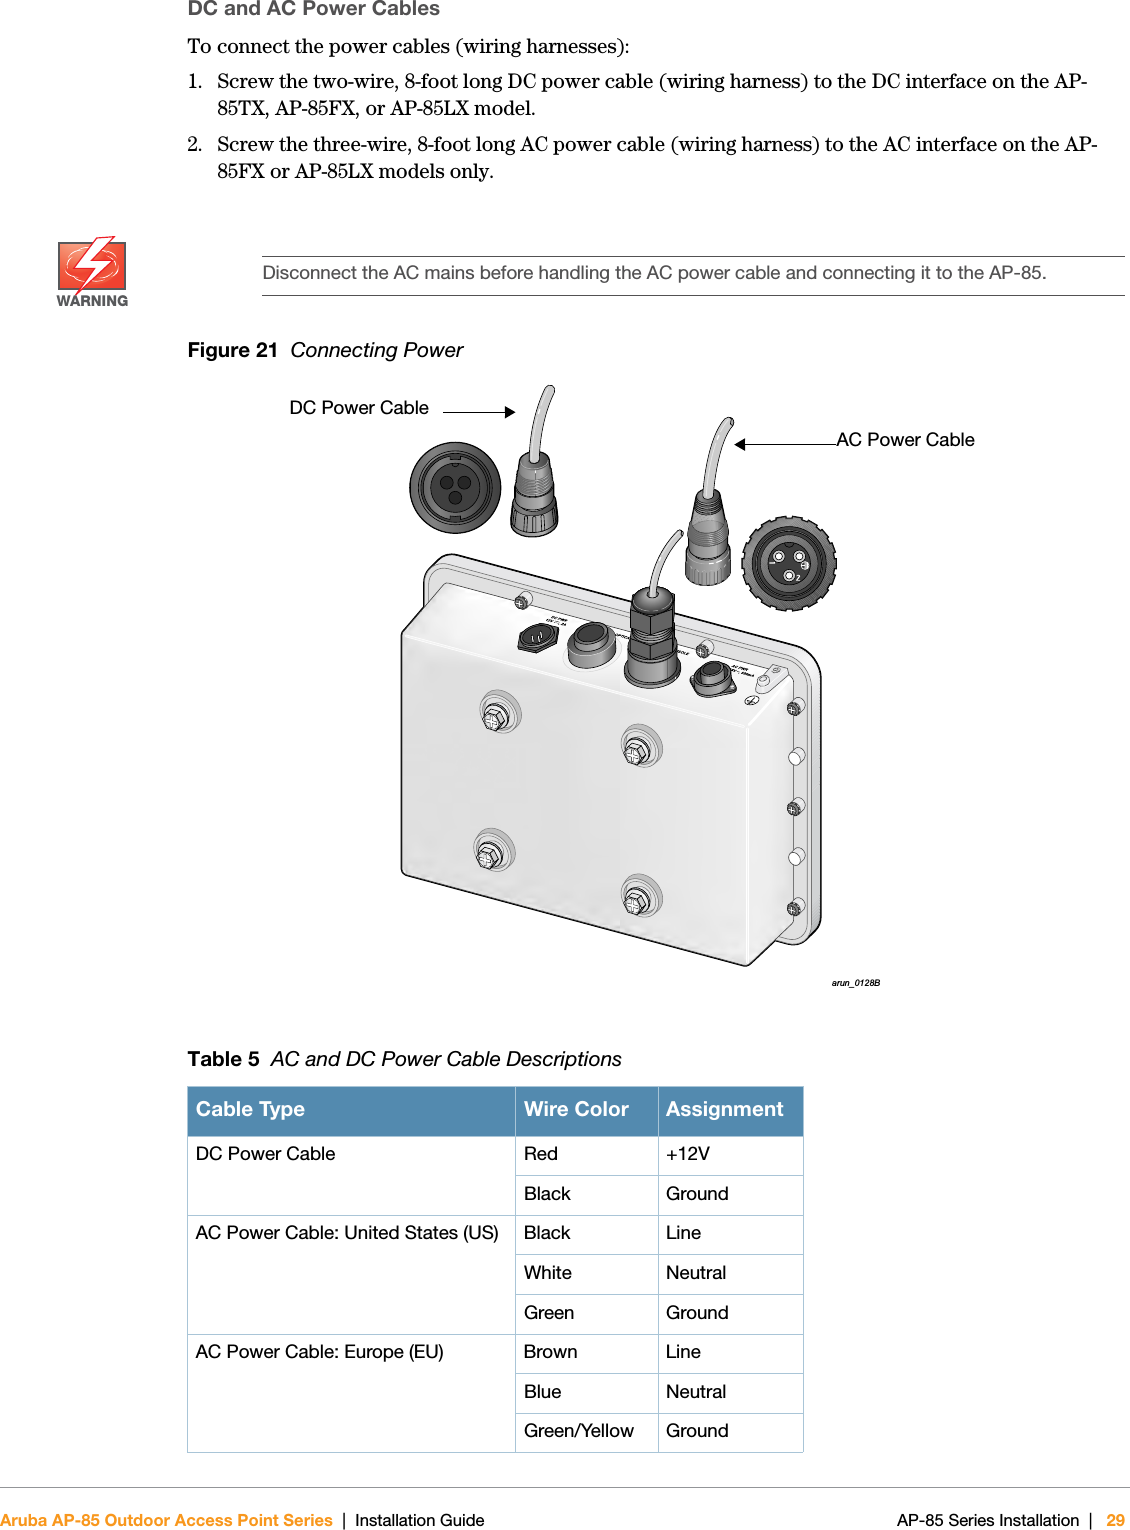  Aruba AP-85 Outdoor Access Point Series | Installation Guide AP-85 Series Installation | 29DC and AC Power CablesTo connect the power cables (wiring harnesses):1. Screw the two-wire, 8-foot long DC power cable (wiring harness) to the DC interface on the AP-85TX, AP-85FX, or AP-85LX model. 2. Screw the three-wire, 8-foot long AC power cable (wiring harness) to the AC interface on the AP-85FX or AP-85LX models only.Figure 21  Connecting PowerWARNINGDisconnect the AC mains before handling the AC power cable and connecting it to the AP-85. Table 5  AC and DC Power Cable DescriptionsCable Type Wire Color AssignmentDC Power Cable Red +12VBlack GroundAC Power Cable: United States (US) Black LineWhite NeutralGreen GroundAC Power Cable: Europe (EU) Brown LineBlue NeutralGreen/Yellow Groundarun_0128BDC Power CableAC Power Cable